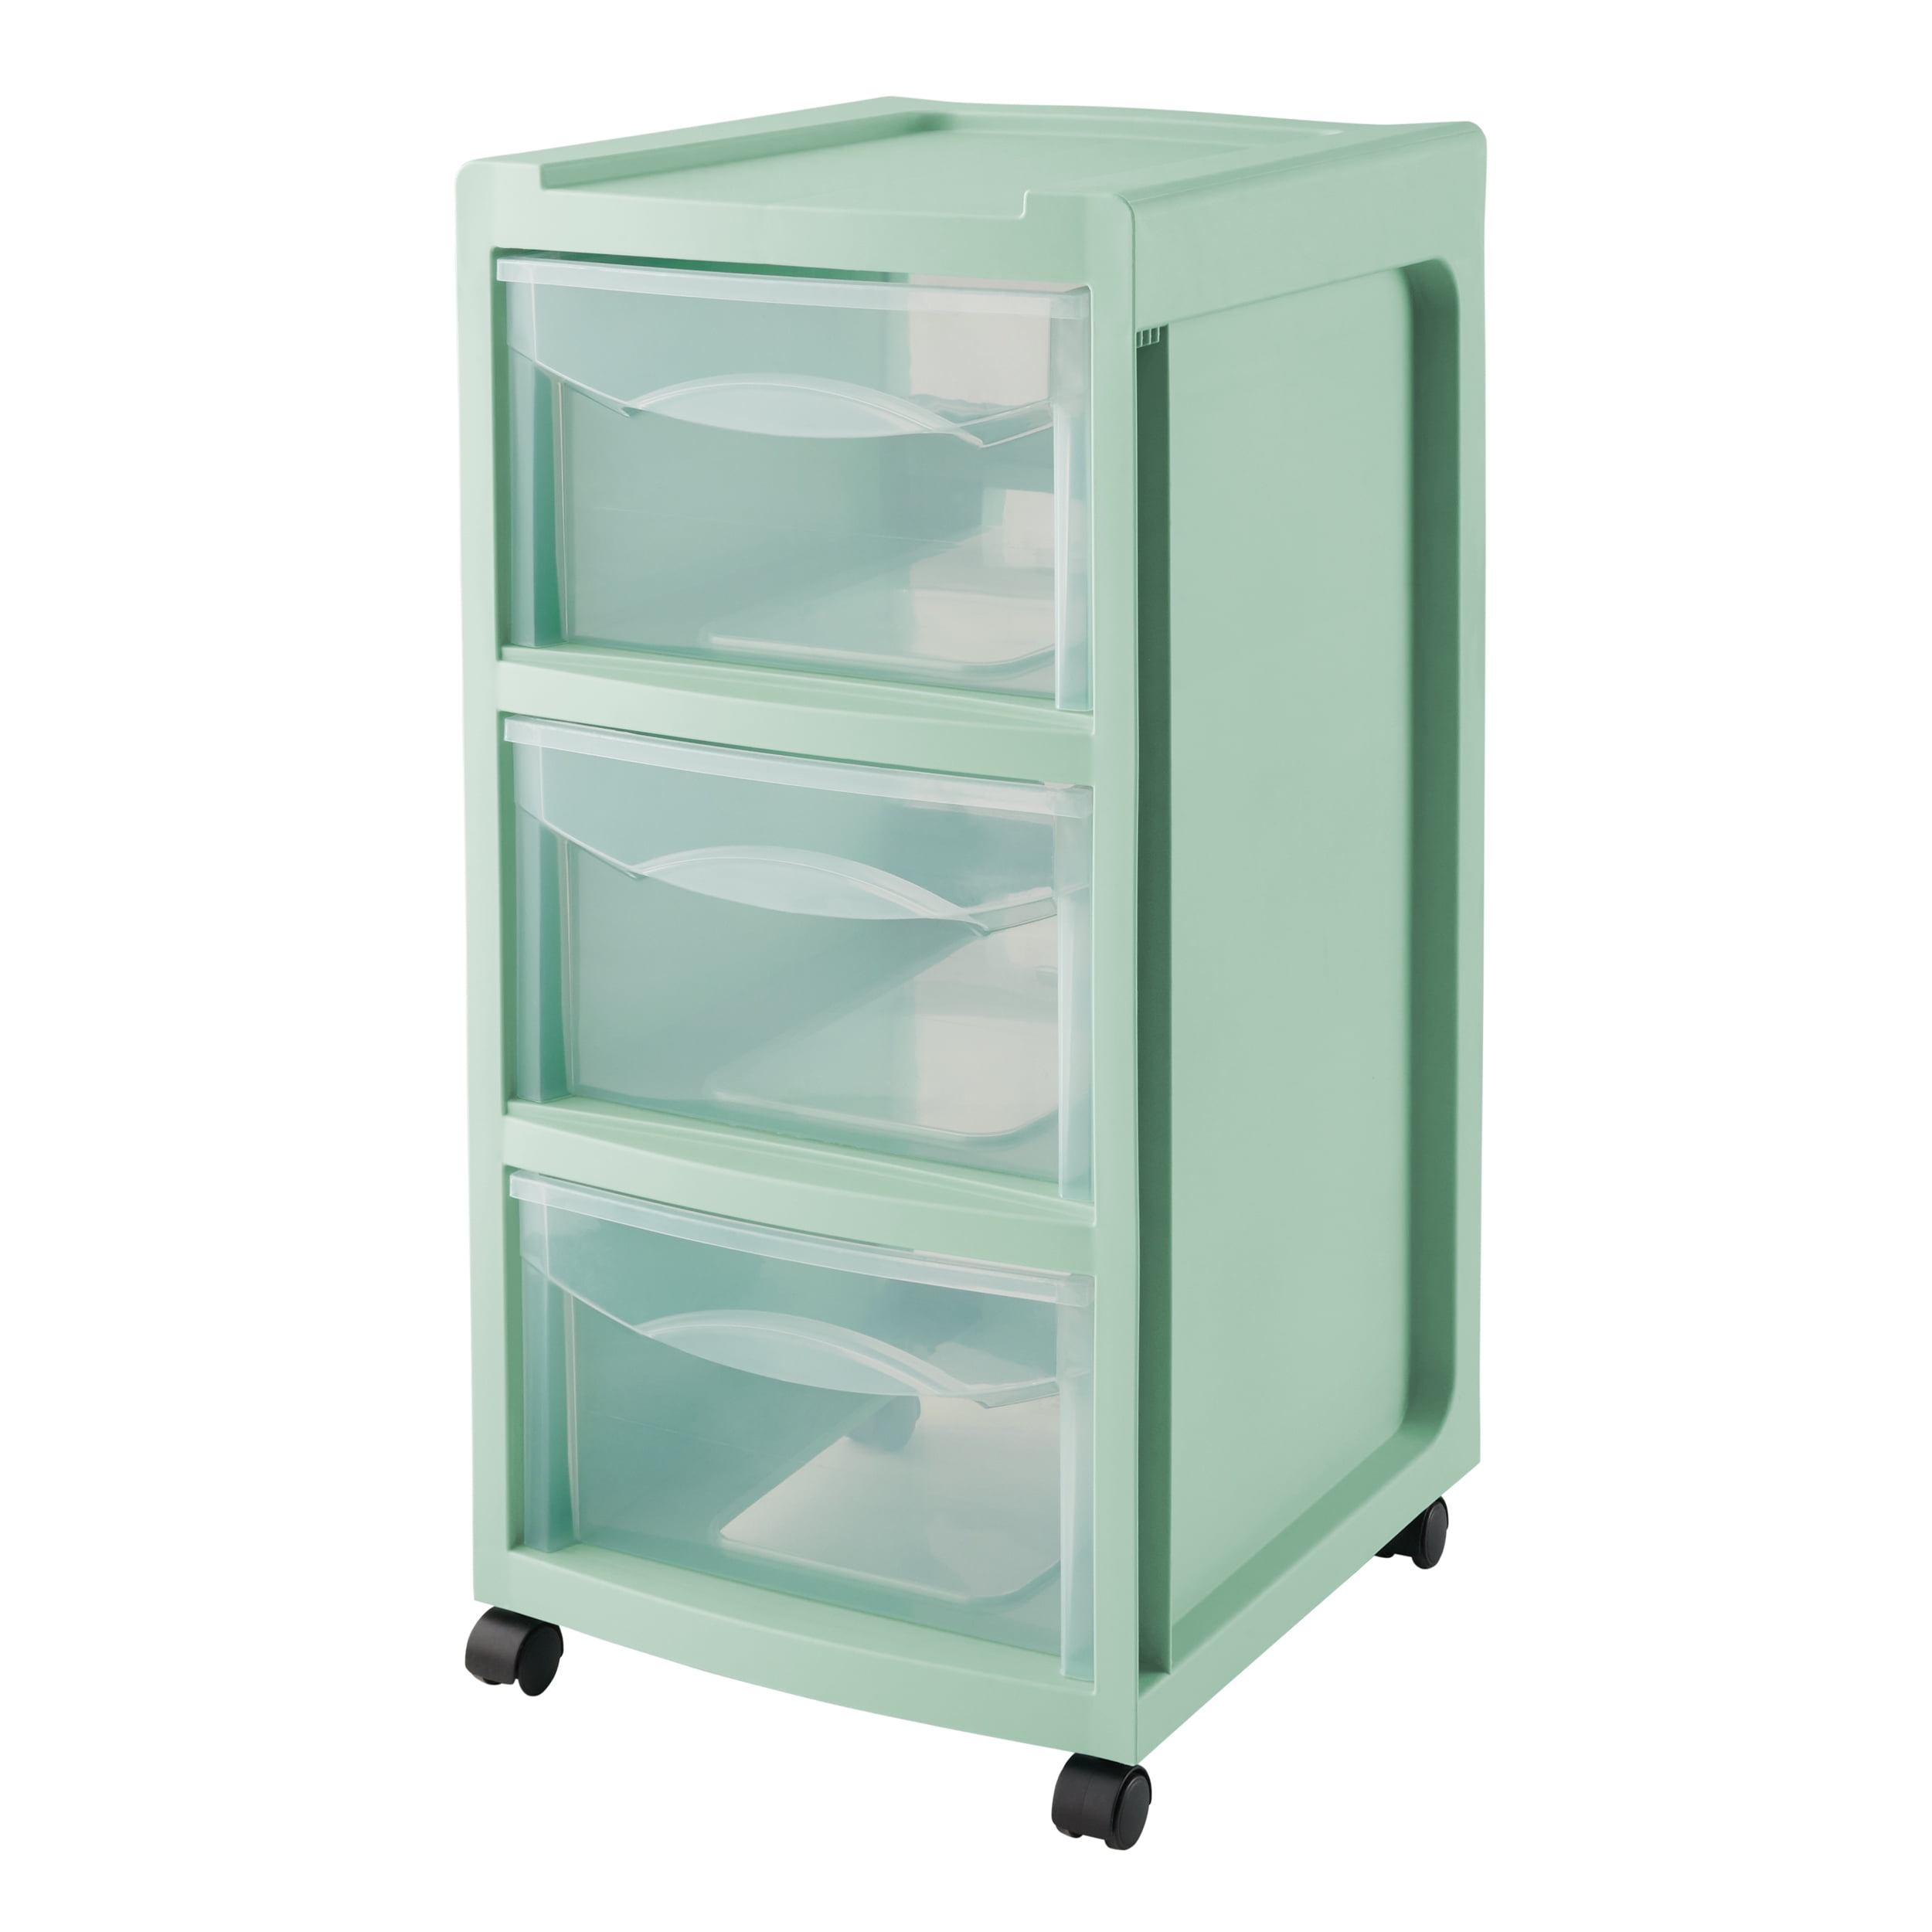 Mainstays Medium 3-Drawer Plastic Storage Cart with Wheels in Classic Mint